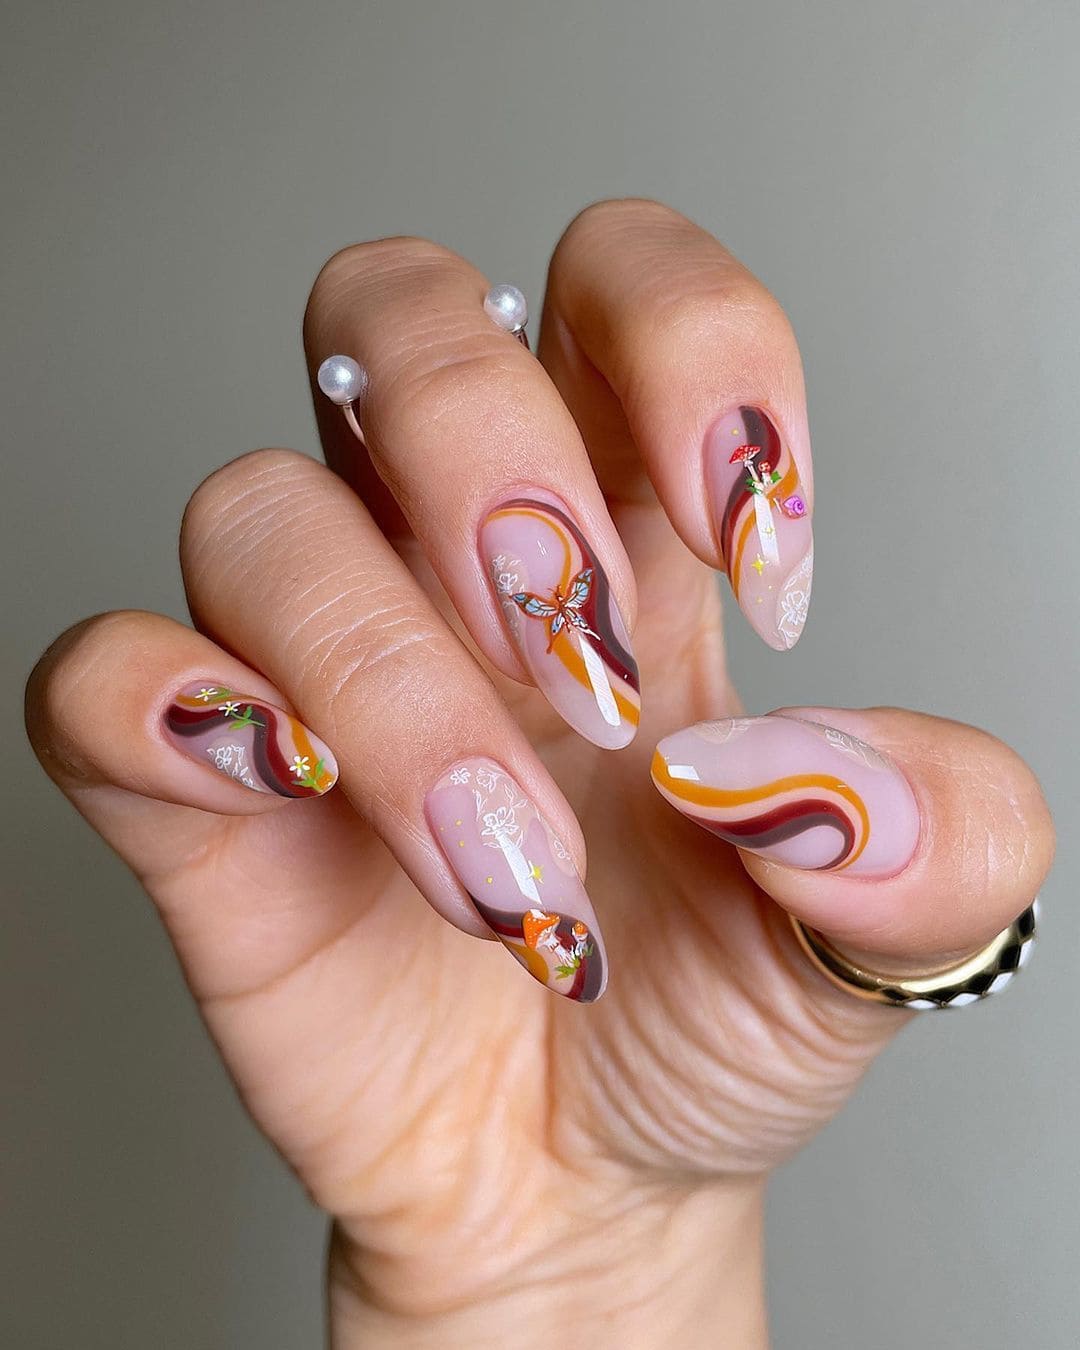 70s Waves Designs on Nails